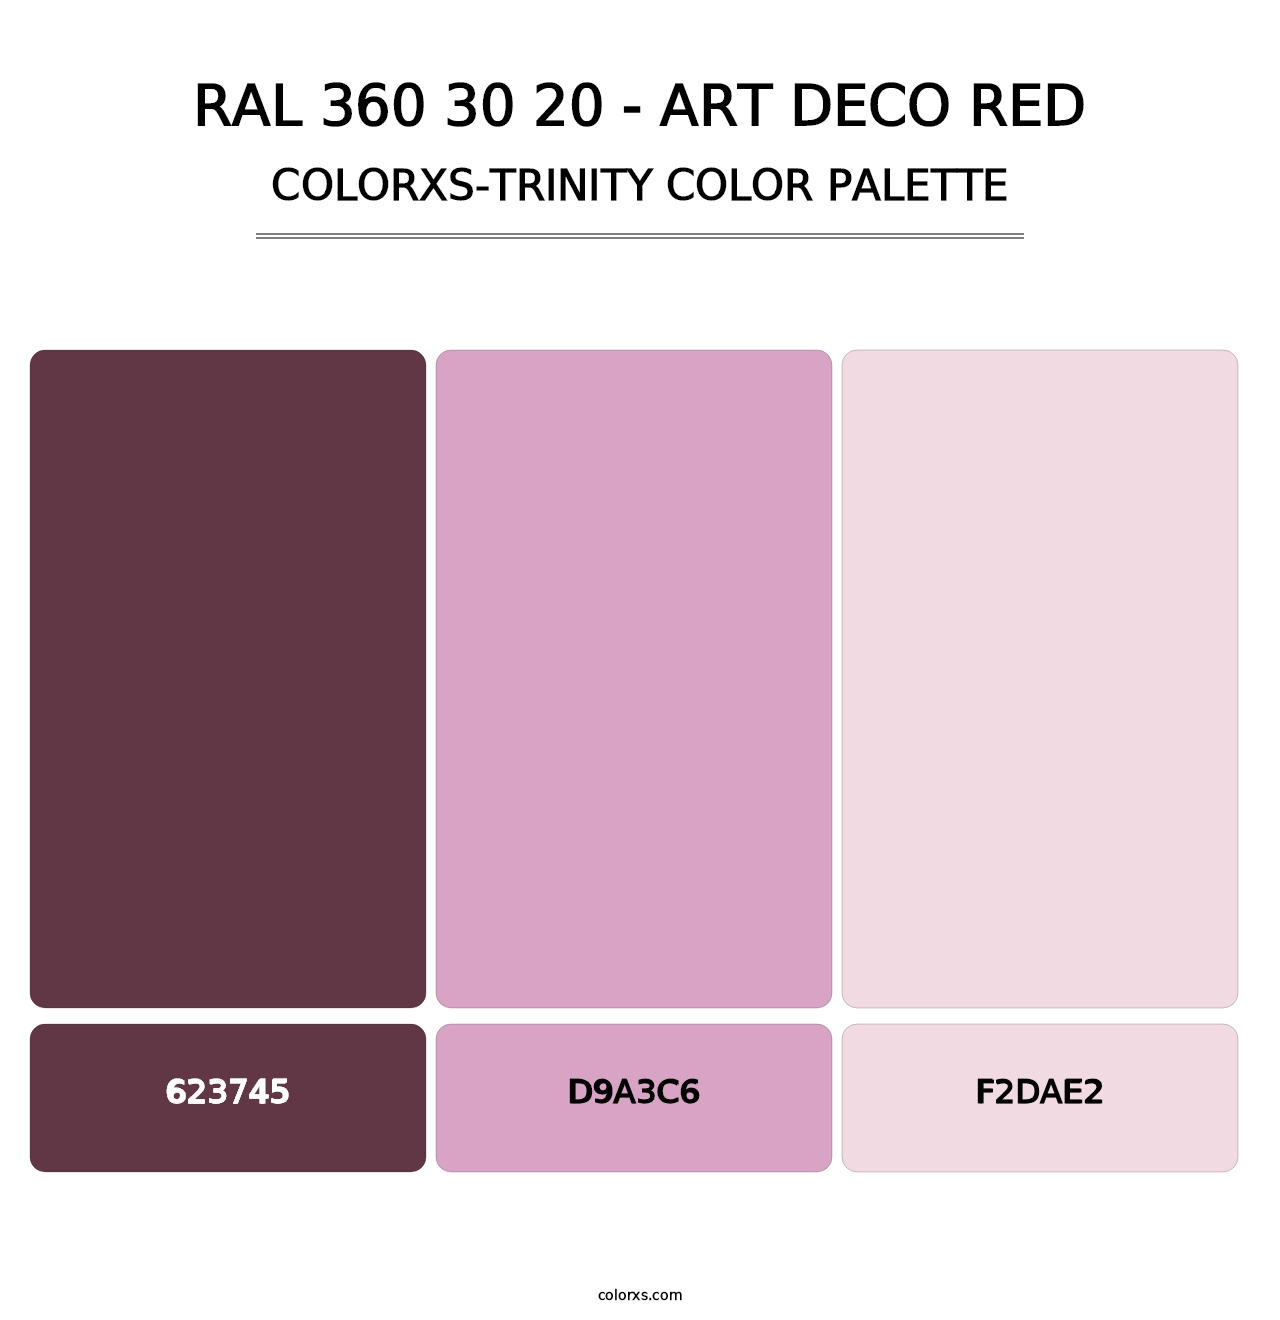 RAL 360 30 20 - Art Deco Red - Colorxs Trinity Palette